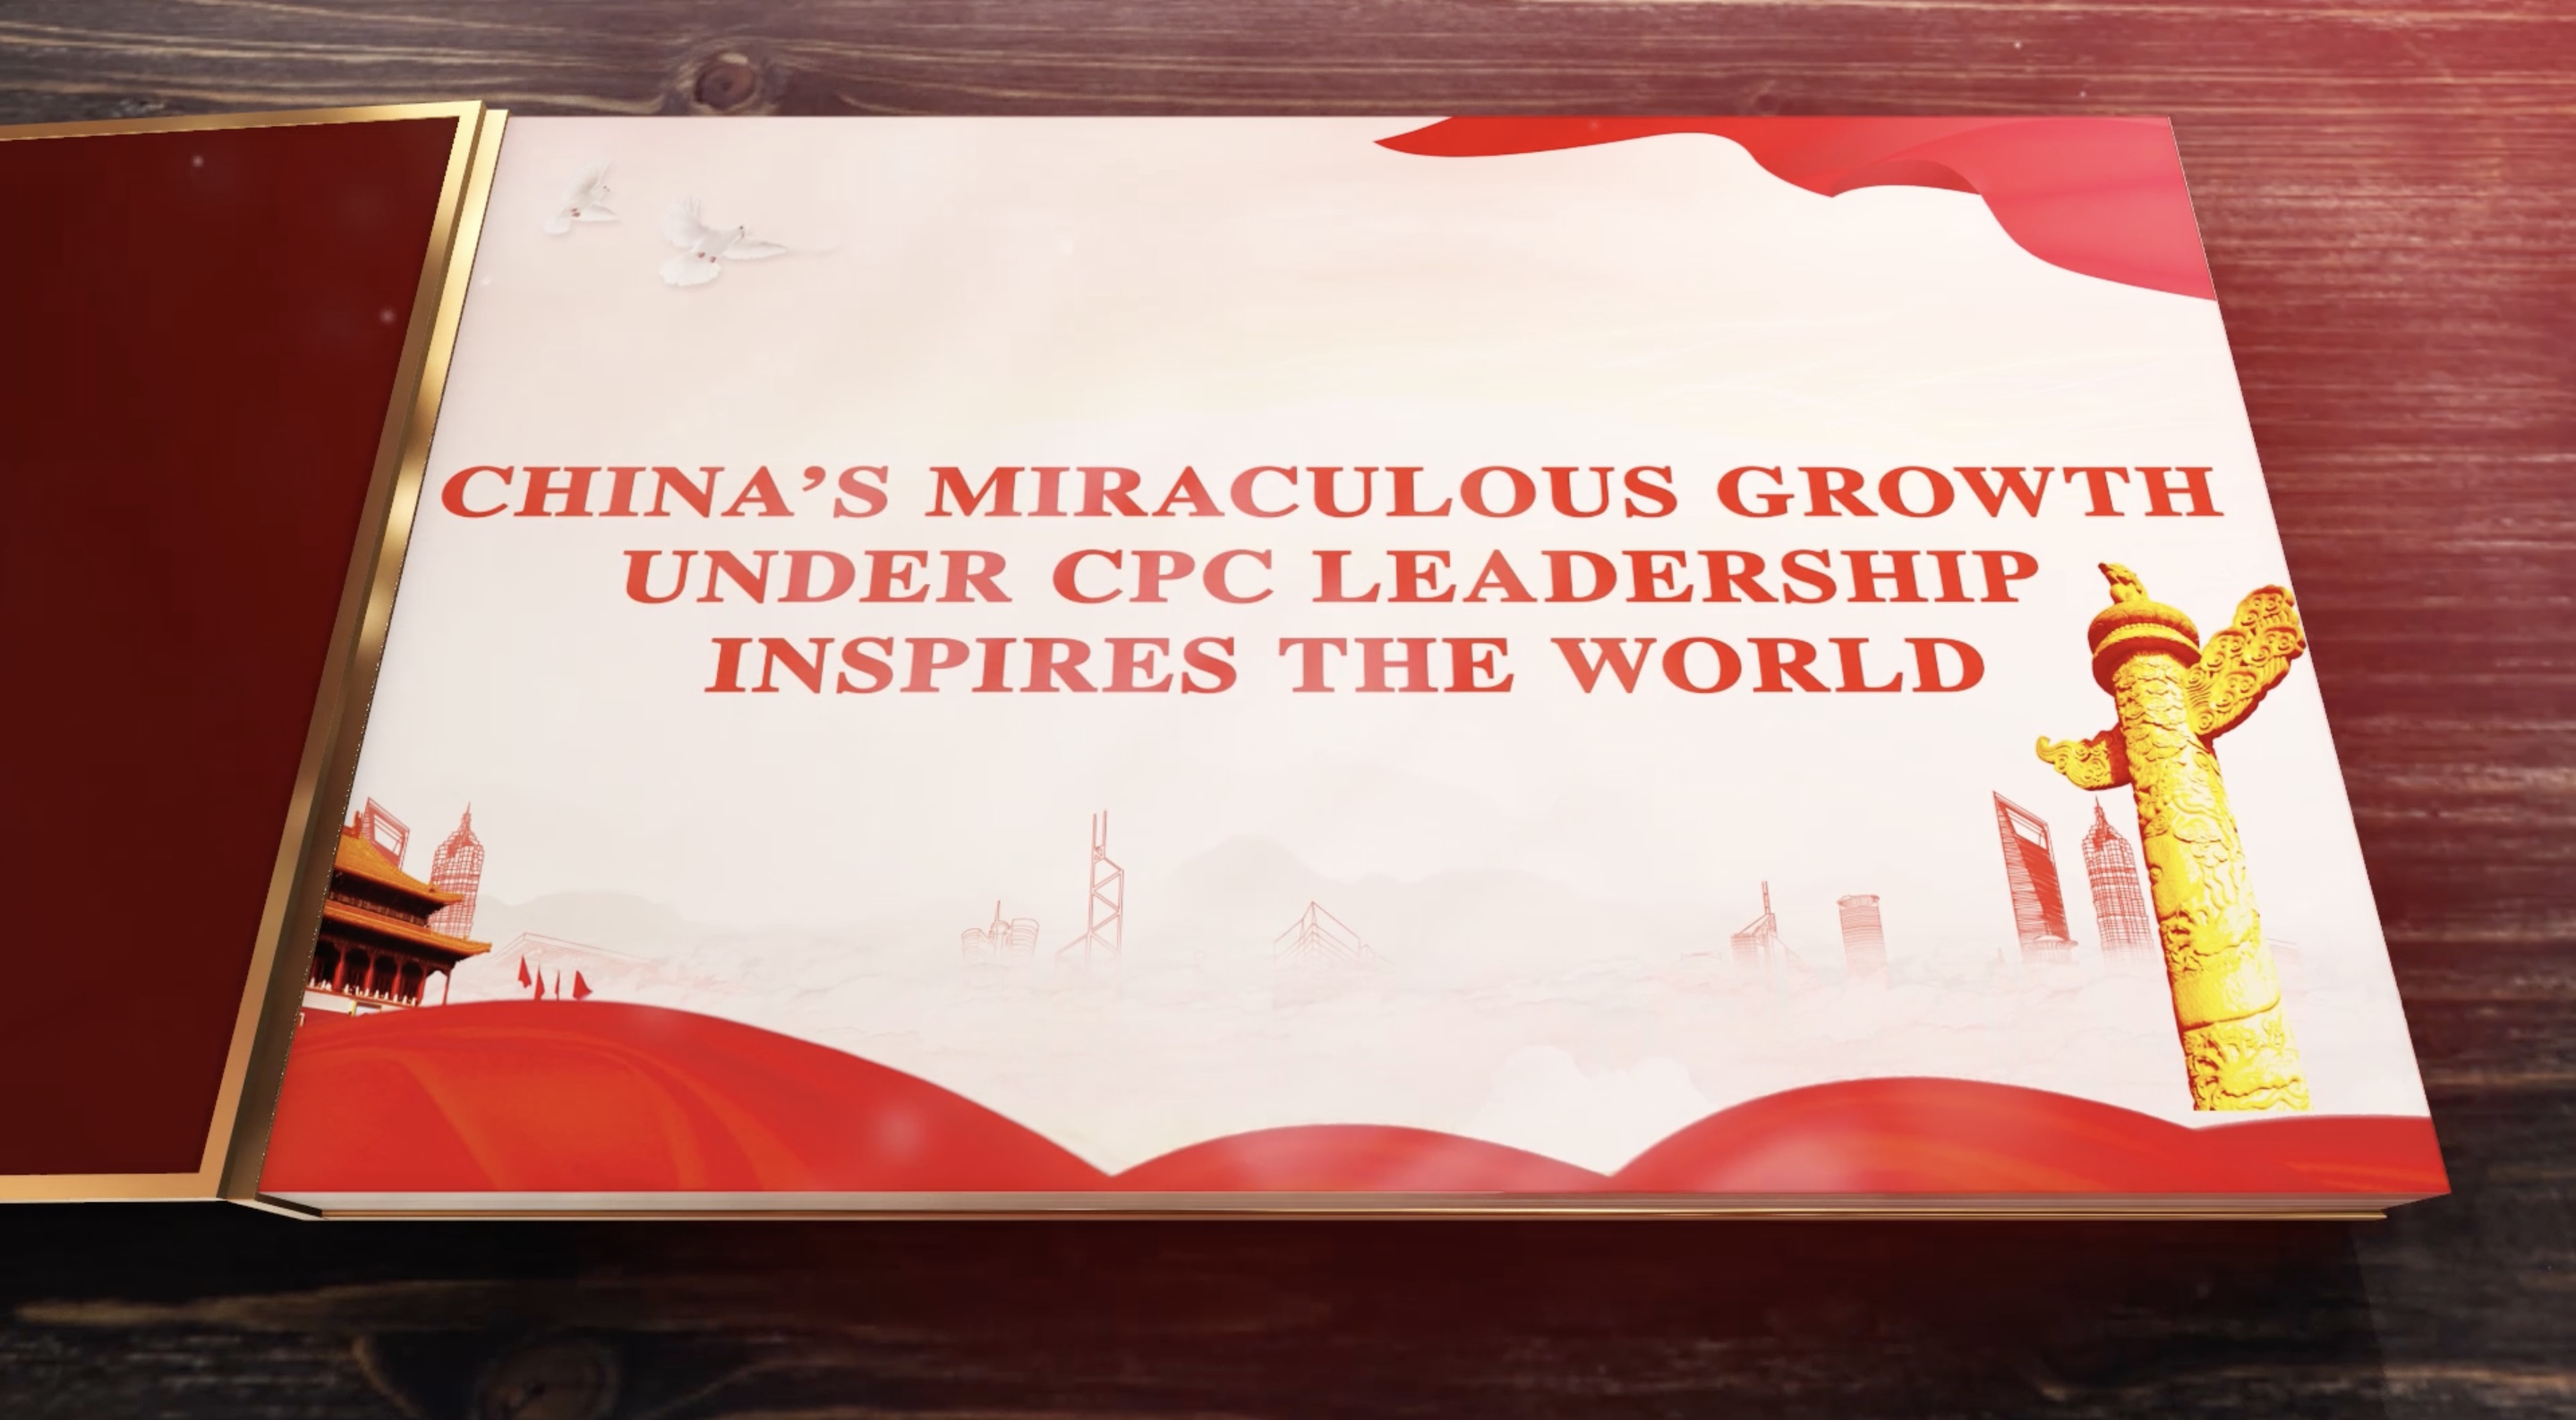 GLOBALink | World political parties on CPC centenary: China's miraculous growth under CPC leadership inspires the world